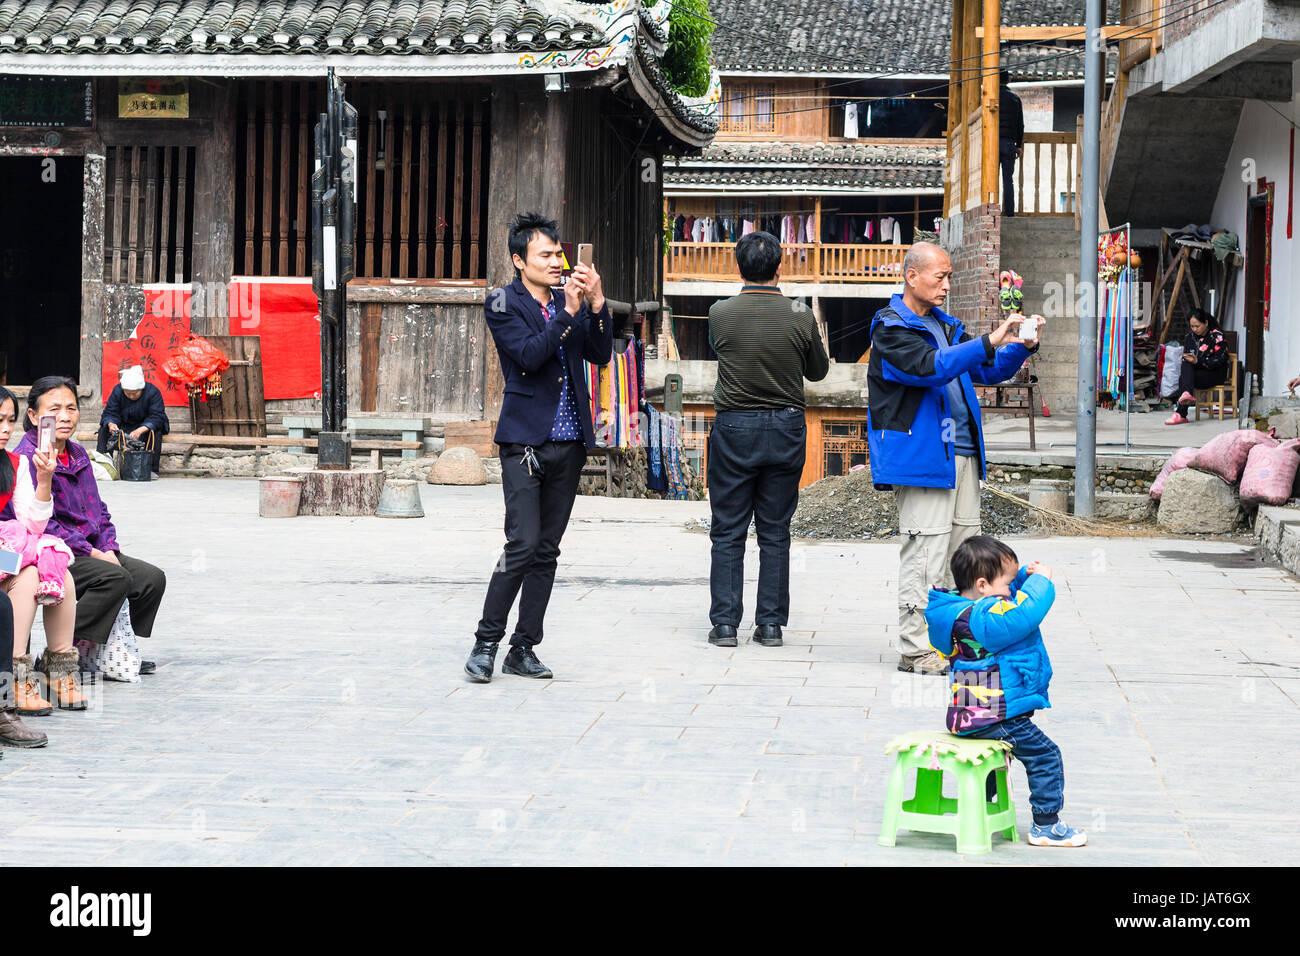 CHENGYANG, CHINA - MARCH 27, 2017: tourists take photos of Dong Culture Show on square of Folk Custom Centre in Chengyang village of Sanjiang County.  Stock Photo